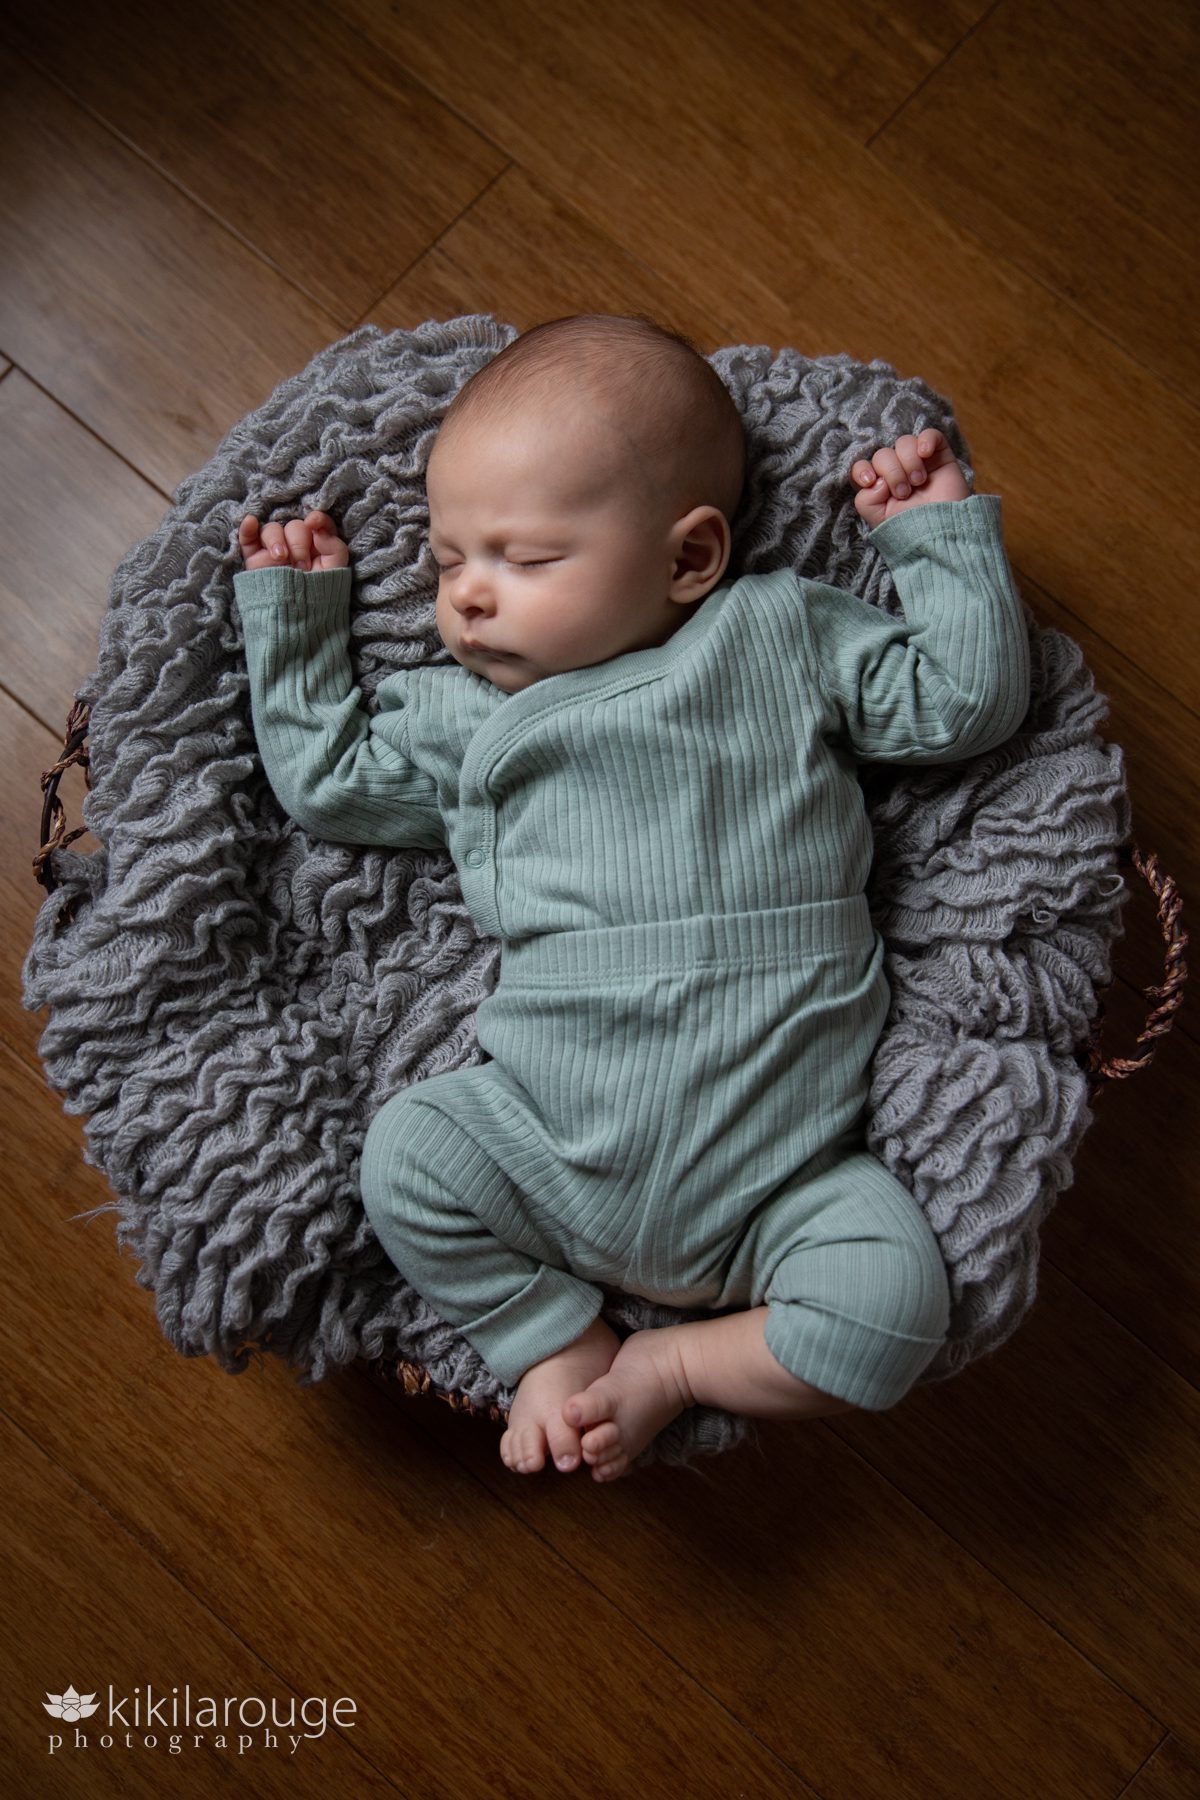 Sleeping baby in a basket with gray blanket